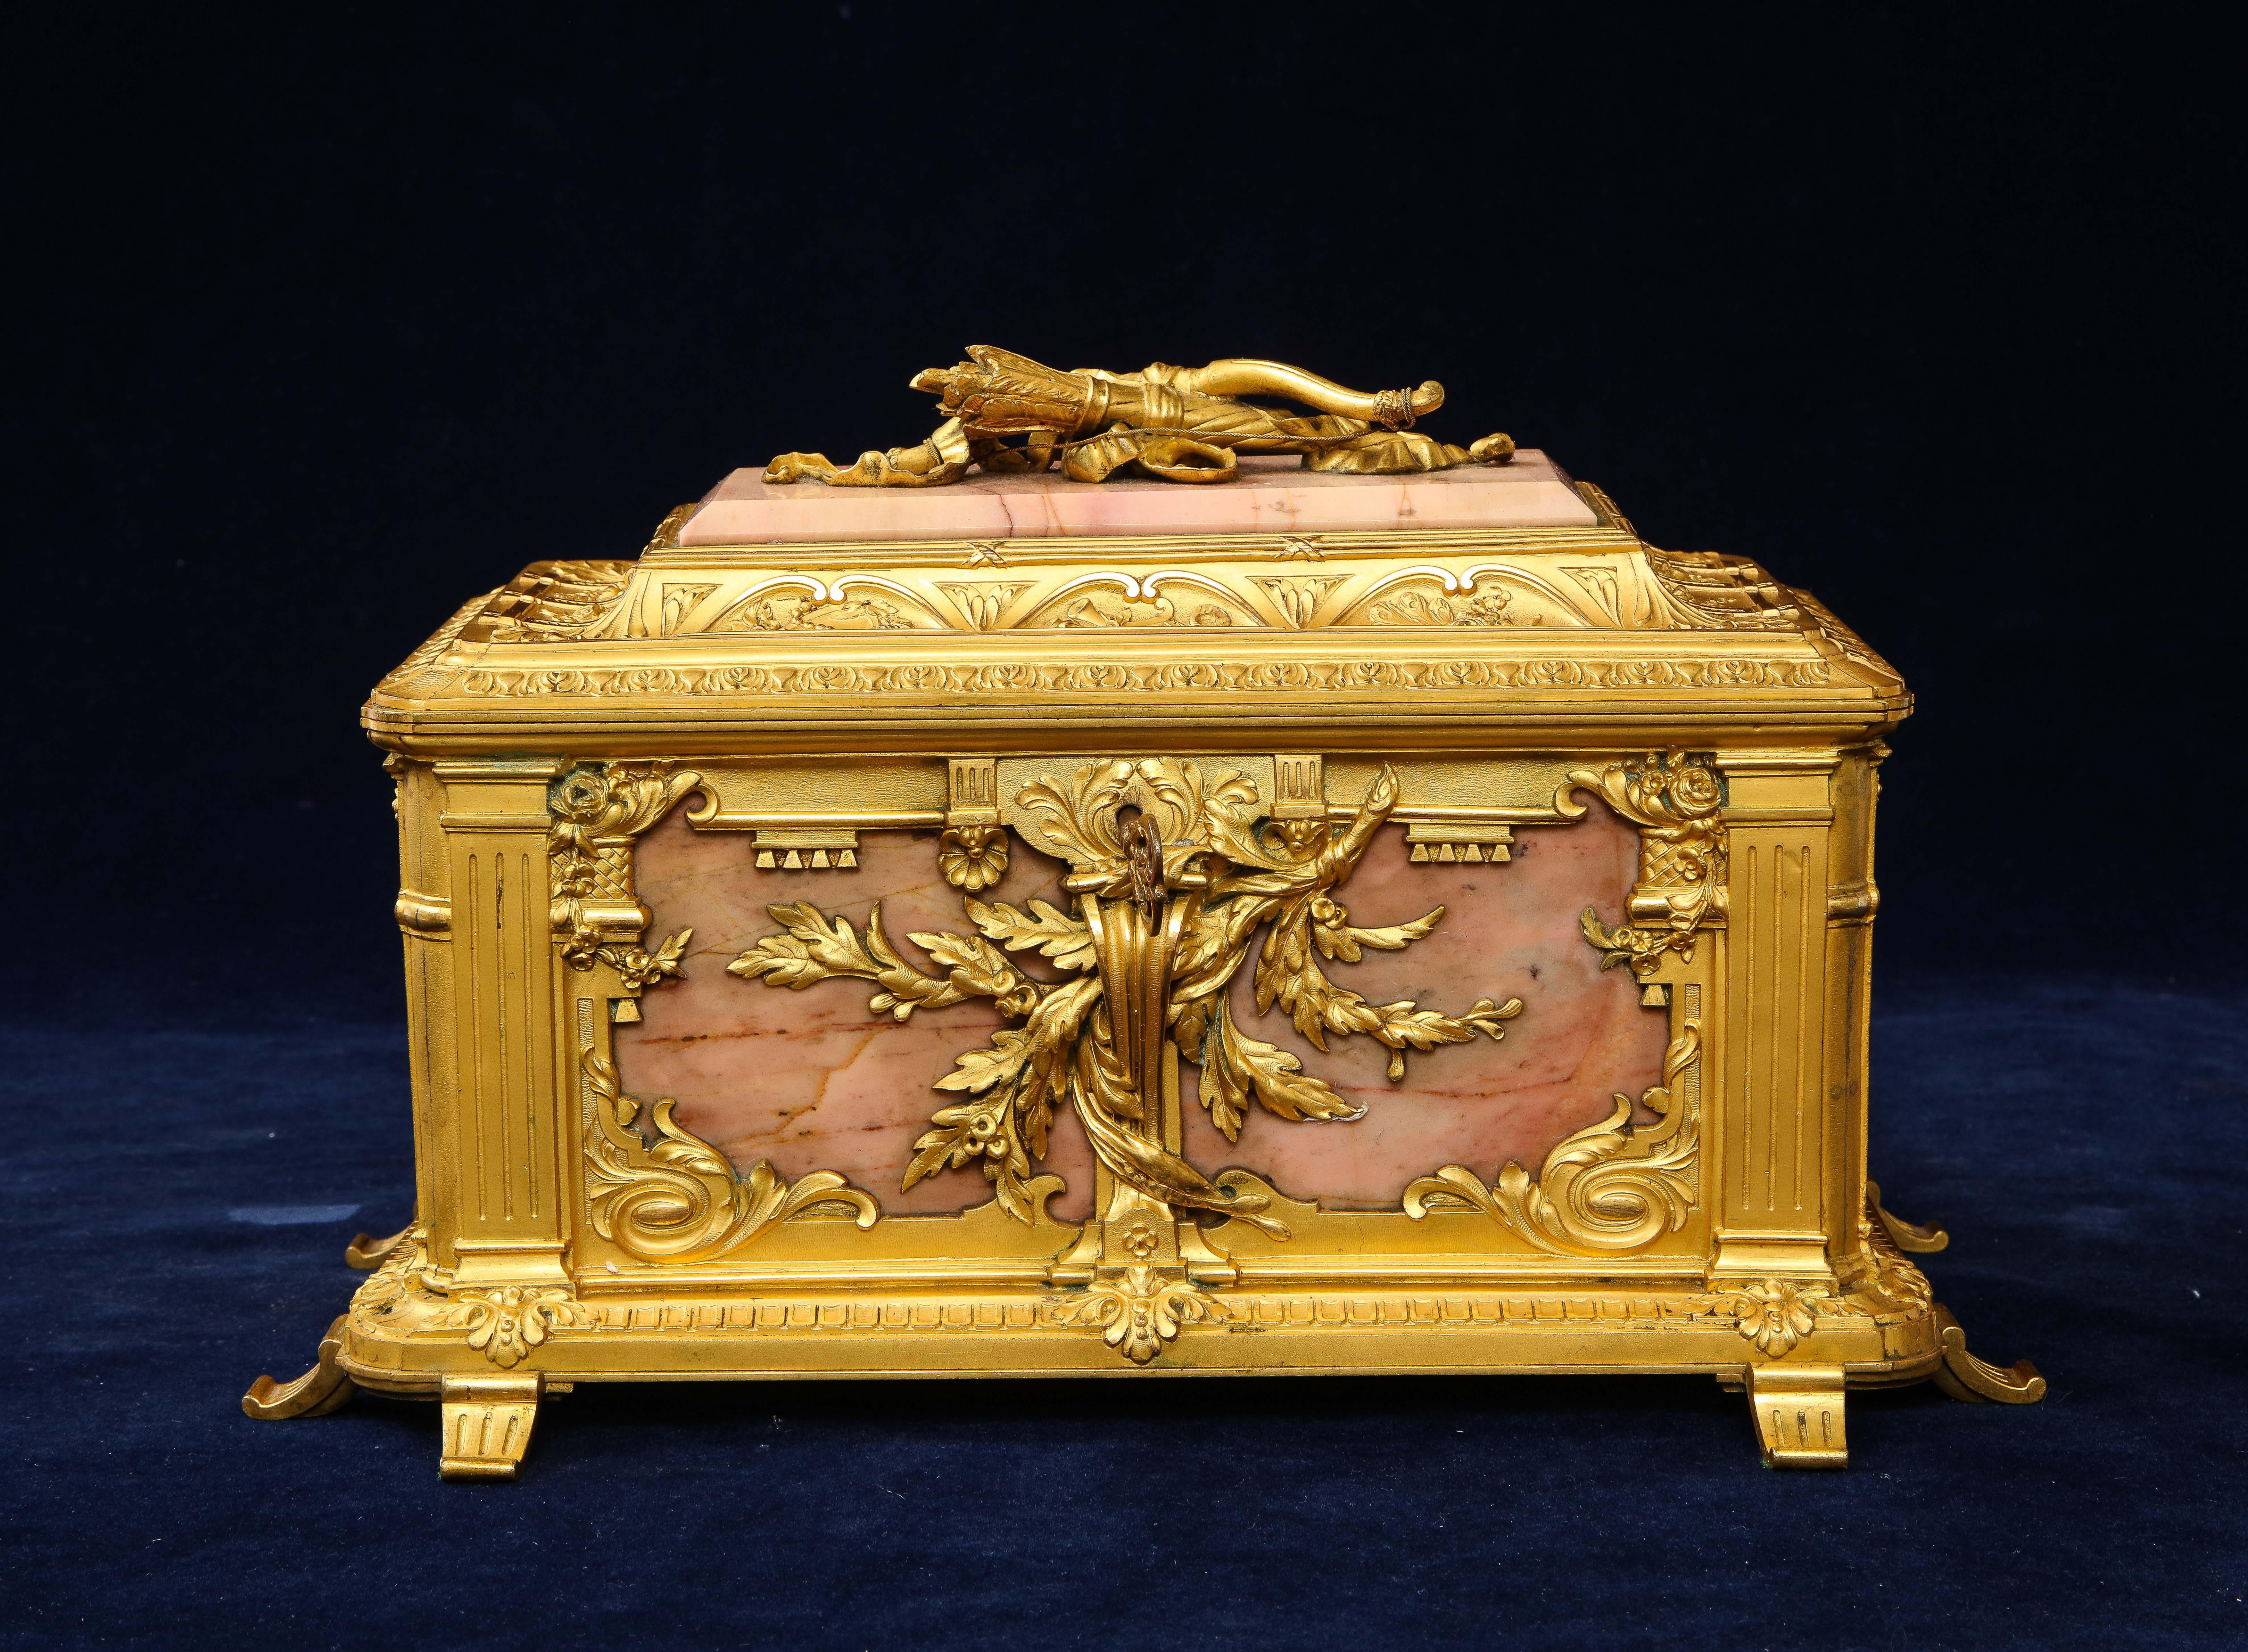 A fantastic quality French 19th century dore bronze mounted and pink marble jewelry casket/jewelry box. The quality of the bronze mounts is truly magnificent; each mount is beautifully hand-chased, hand-chiseled, matted and burnished with incredible